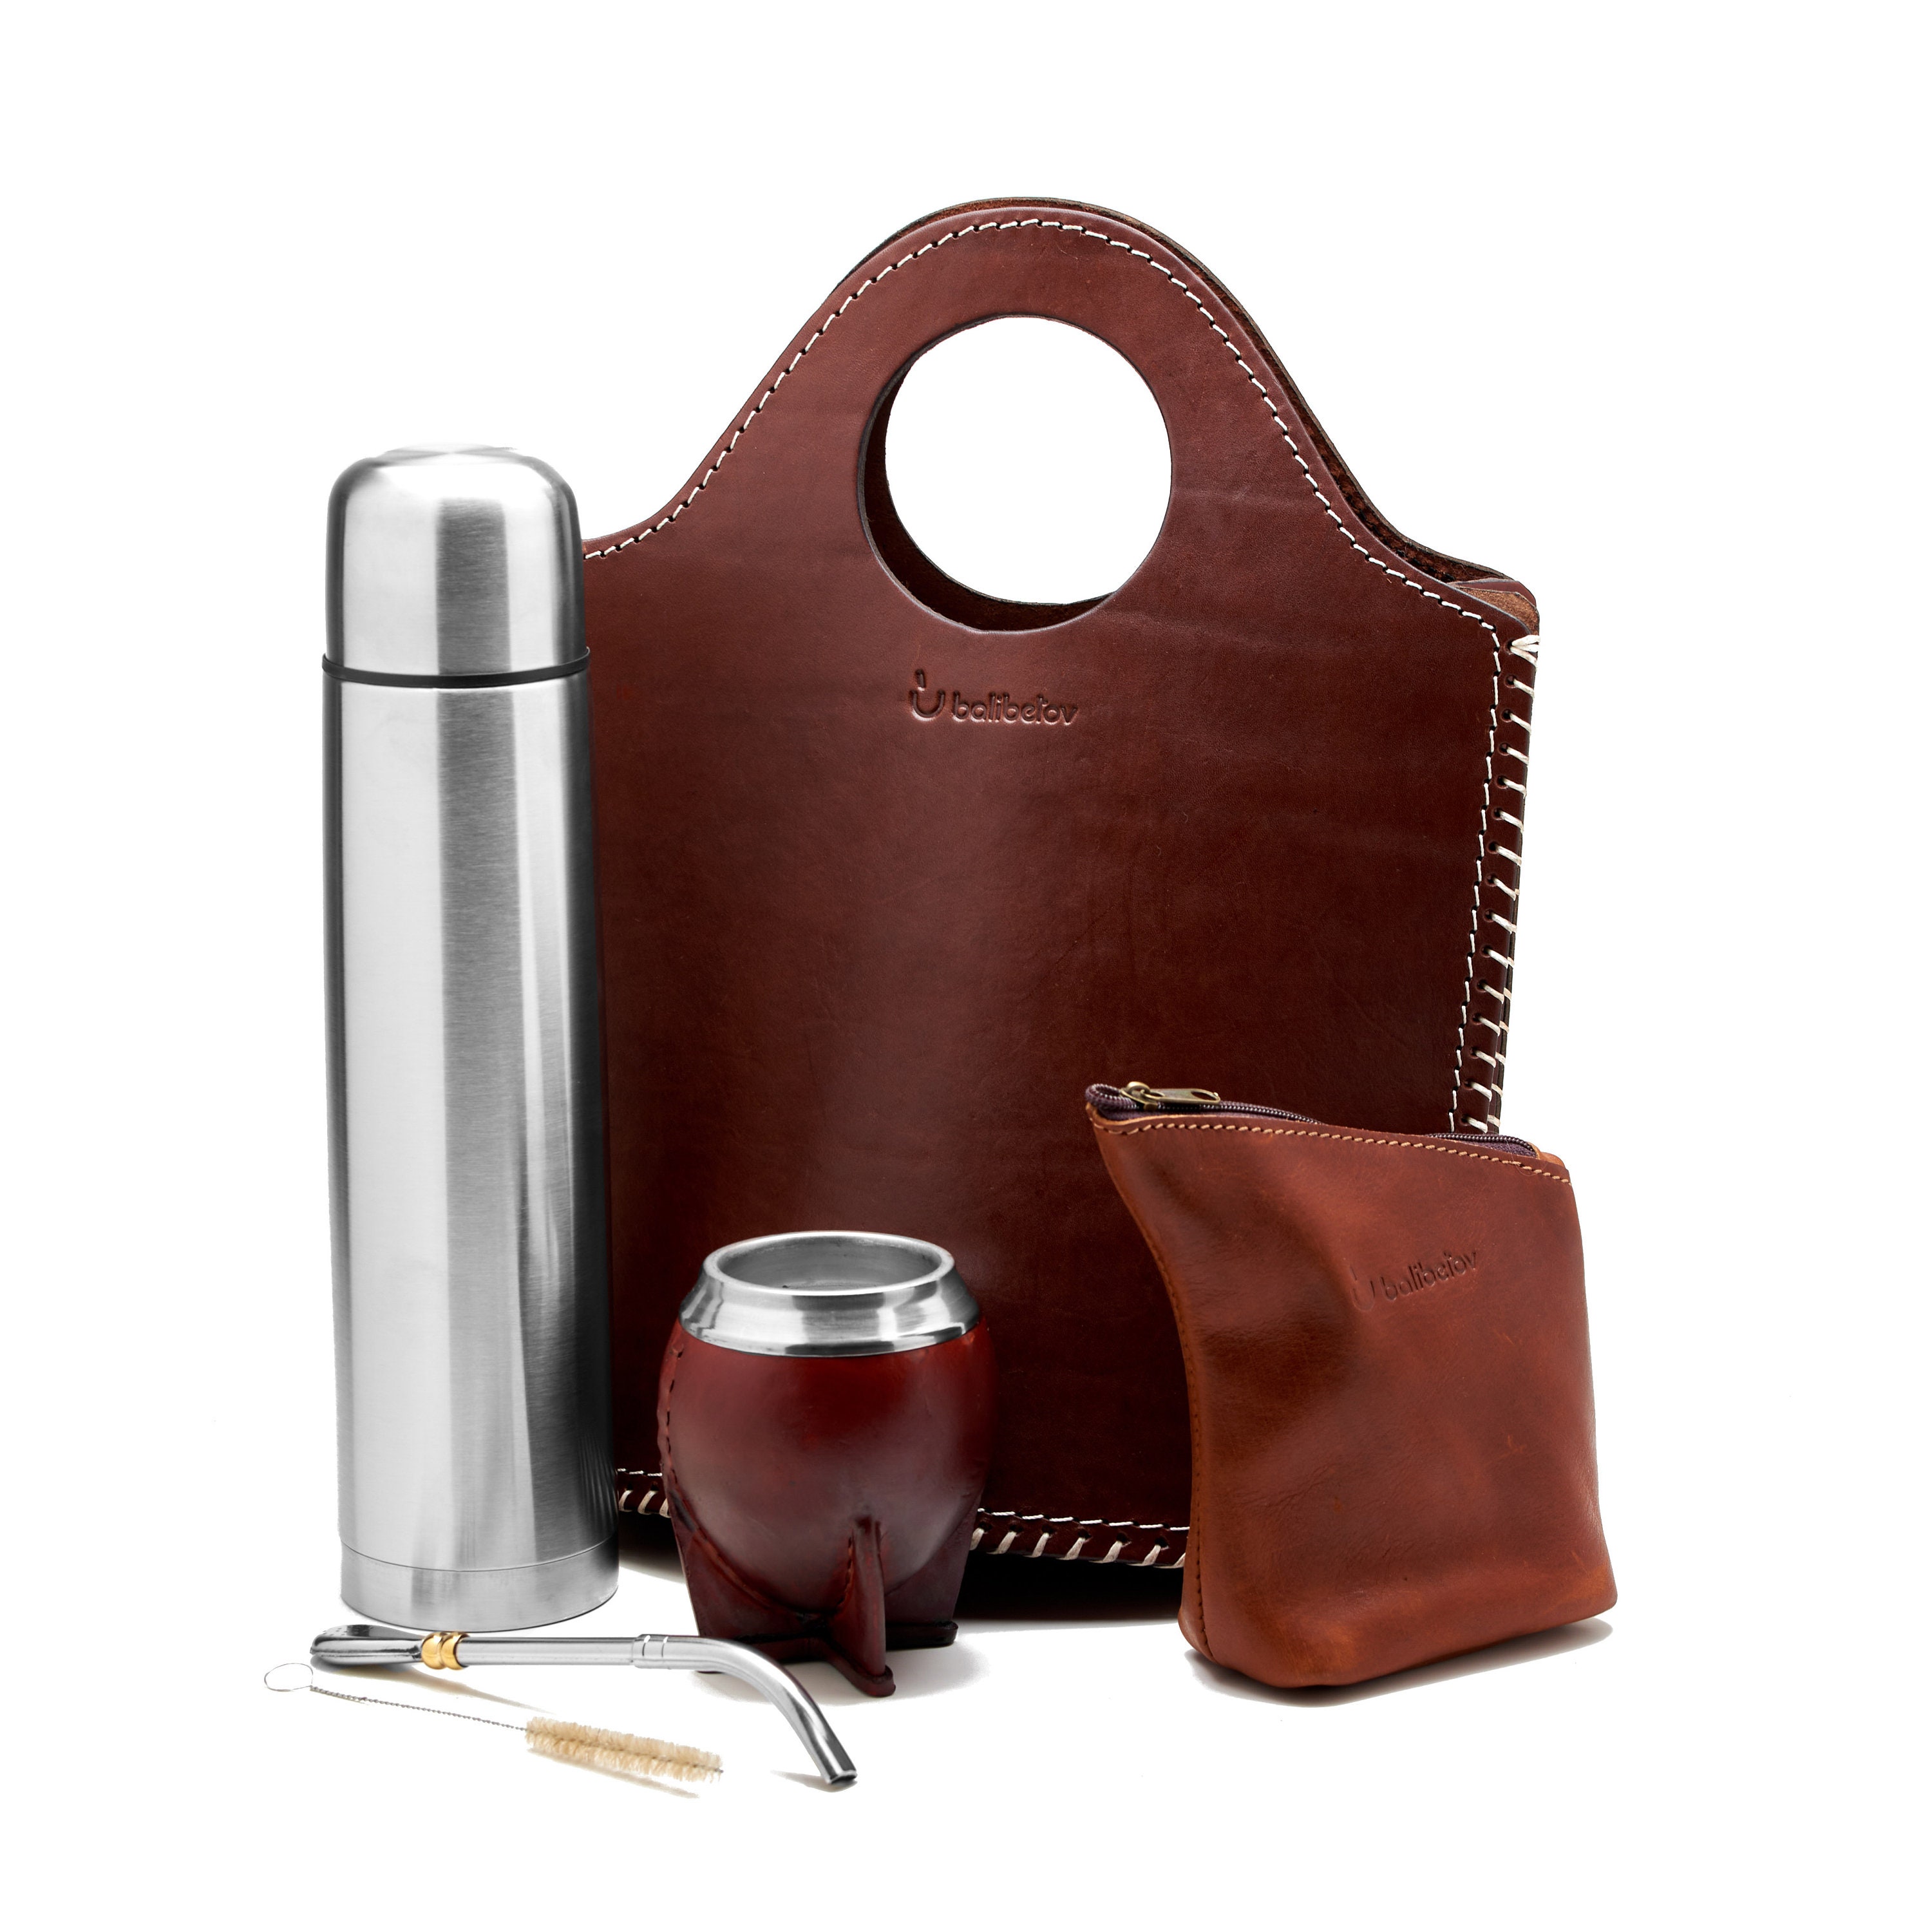 BALIBETOV Yerba Mate Kit - Includes 1 Yerba Mate Cup, 1  Bombilla Mate Straw, and 1 Mate Termo with 2 Stoppers - The Stainless Steel  Yerba Mate Gourd, Includes Lid (Blue): Teacups